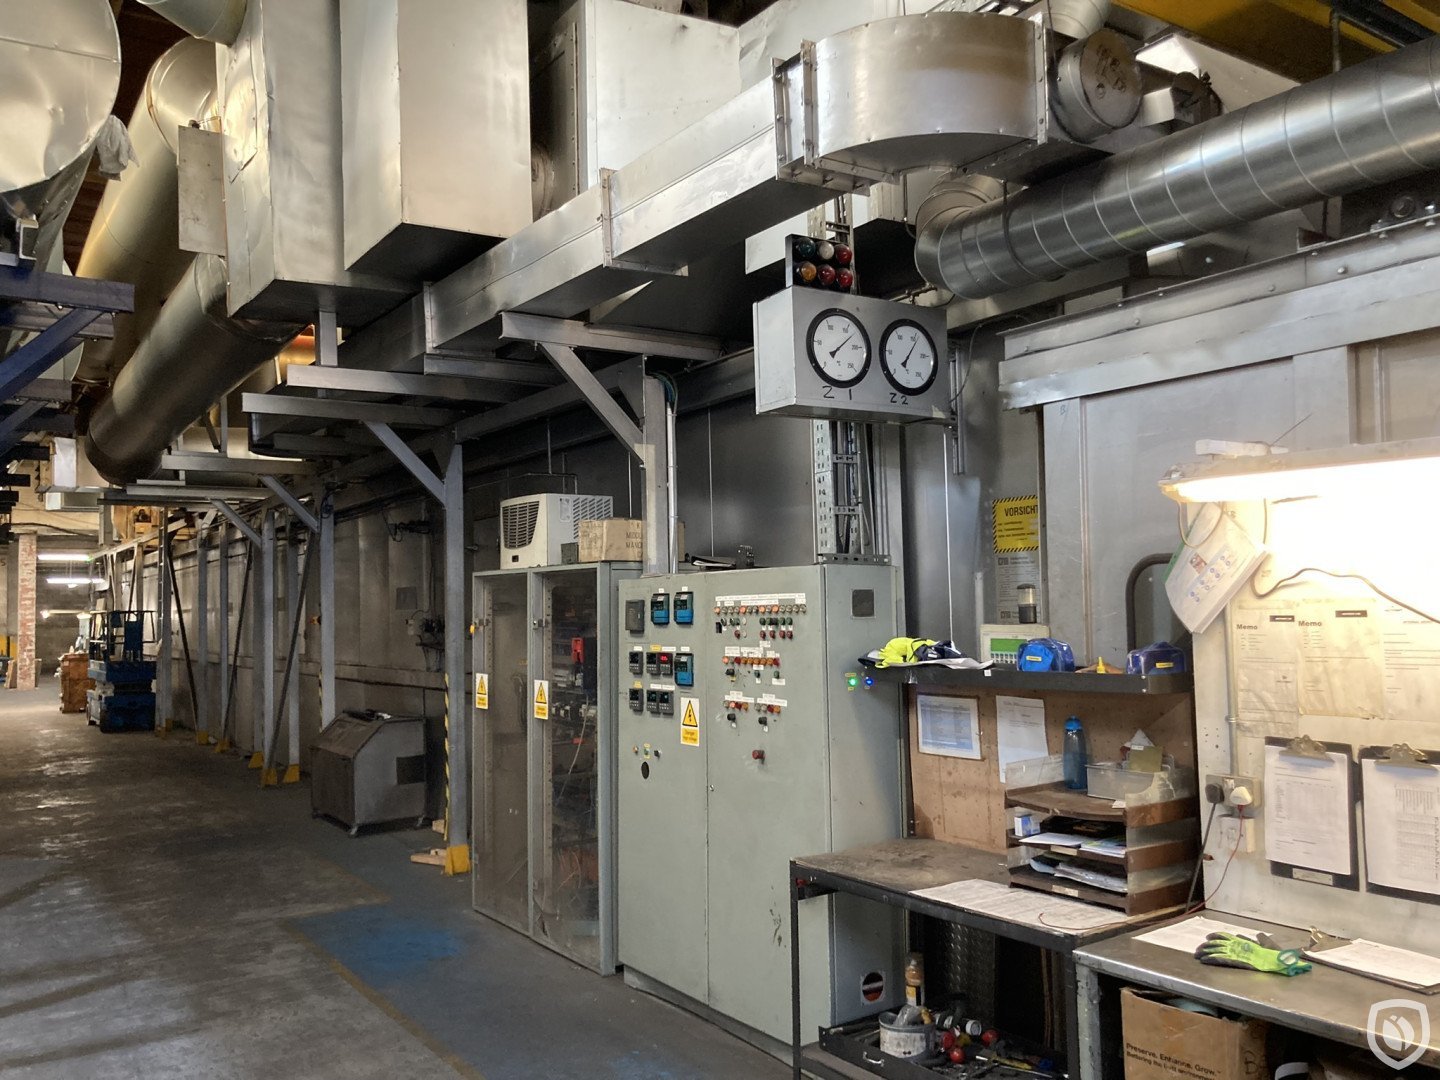 FUJI-C451 coating line with 28 meter LTG tunnel-oven